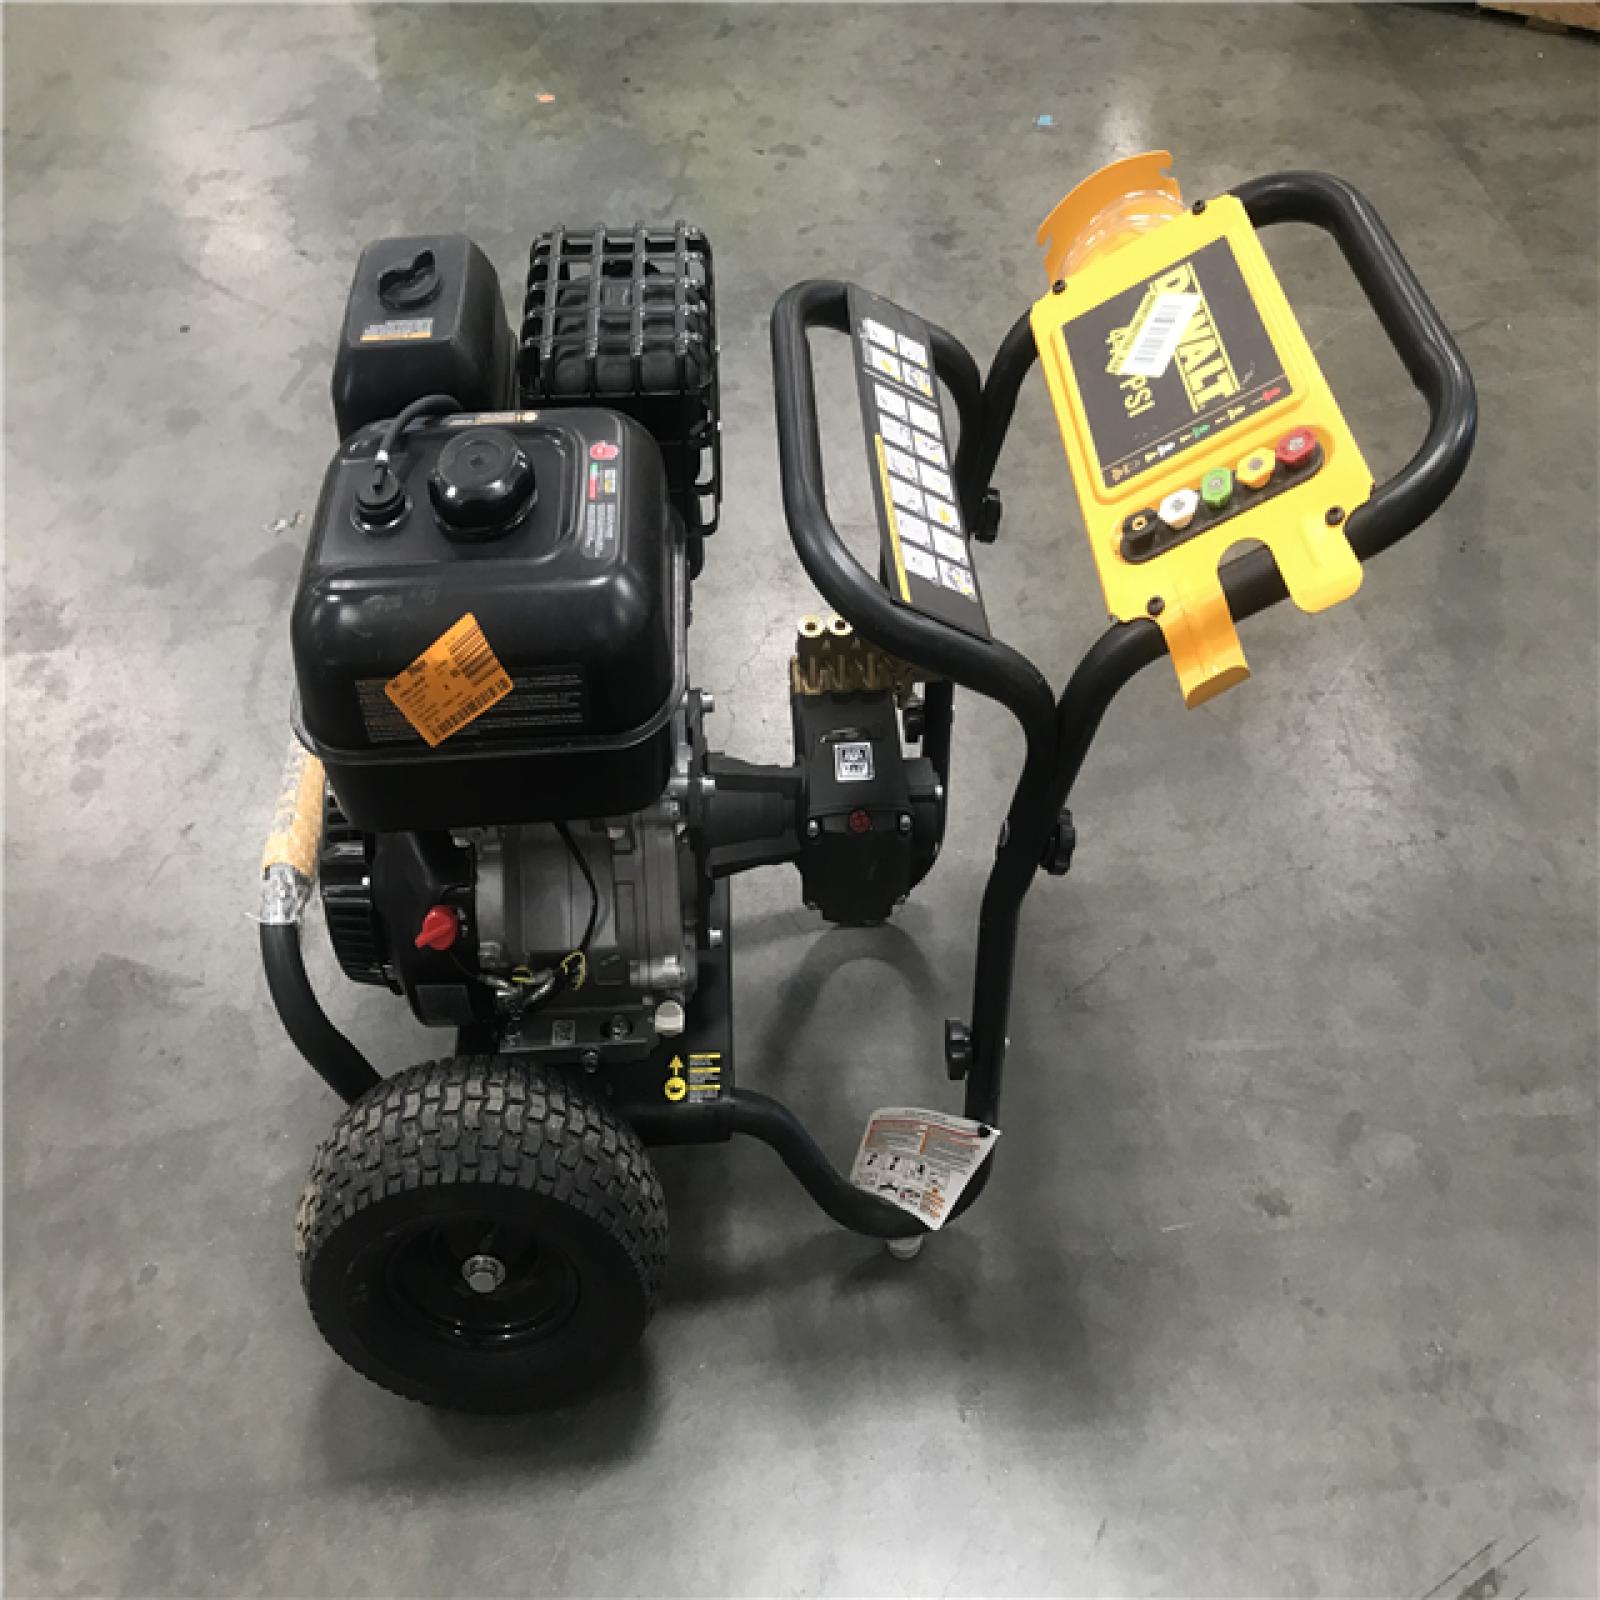 California AS-IS DEWALT 4400 PSI 4.0 GPM Gas Cold Water Pressure Washer with 420cc Engine